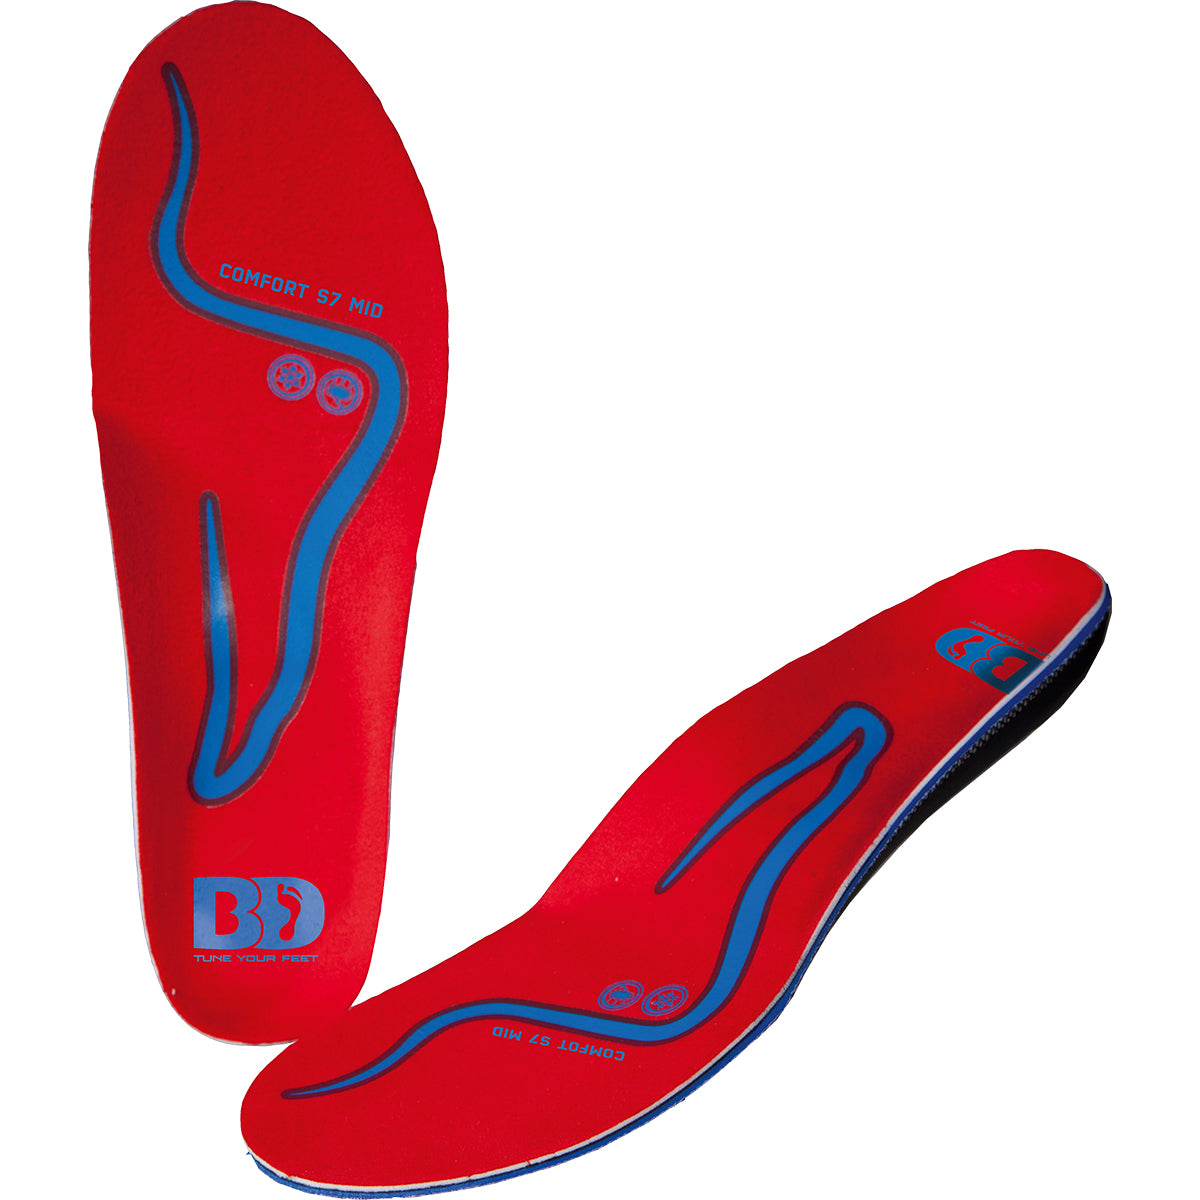 BootDoc Comfort S8 Mid Insole